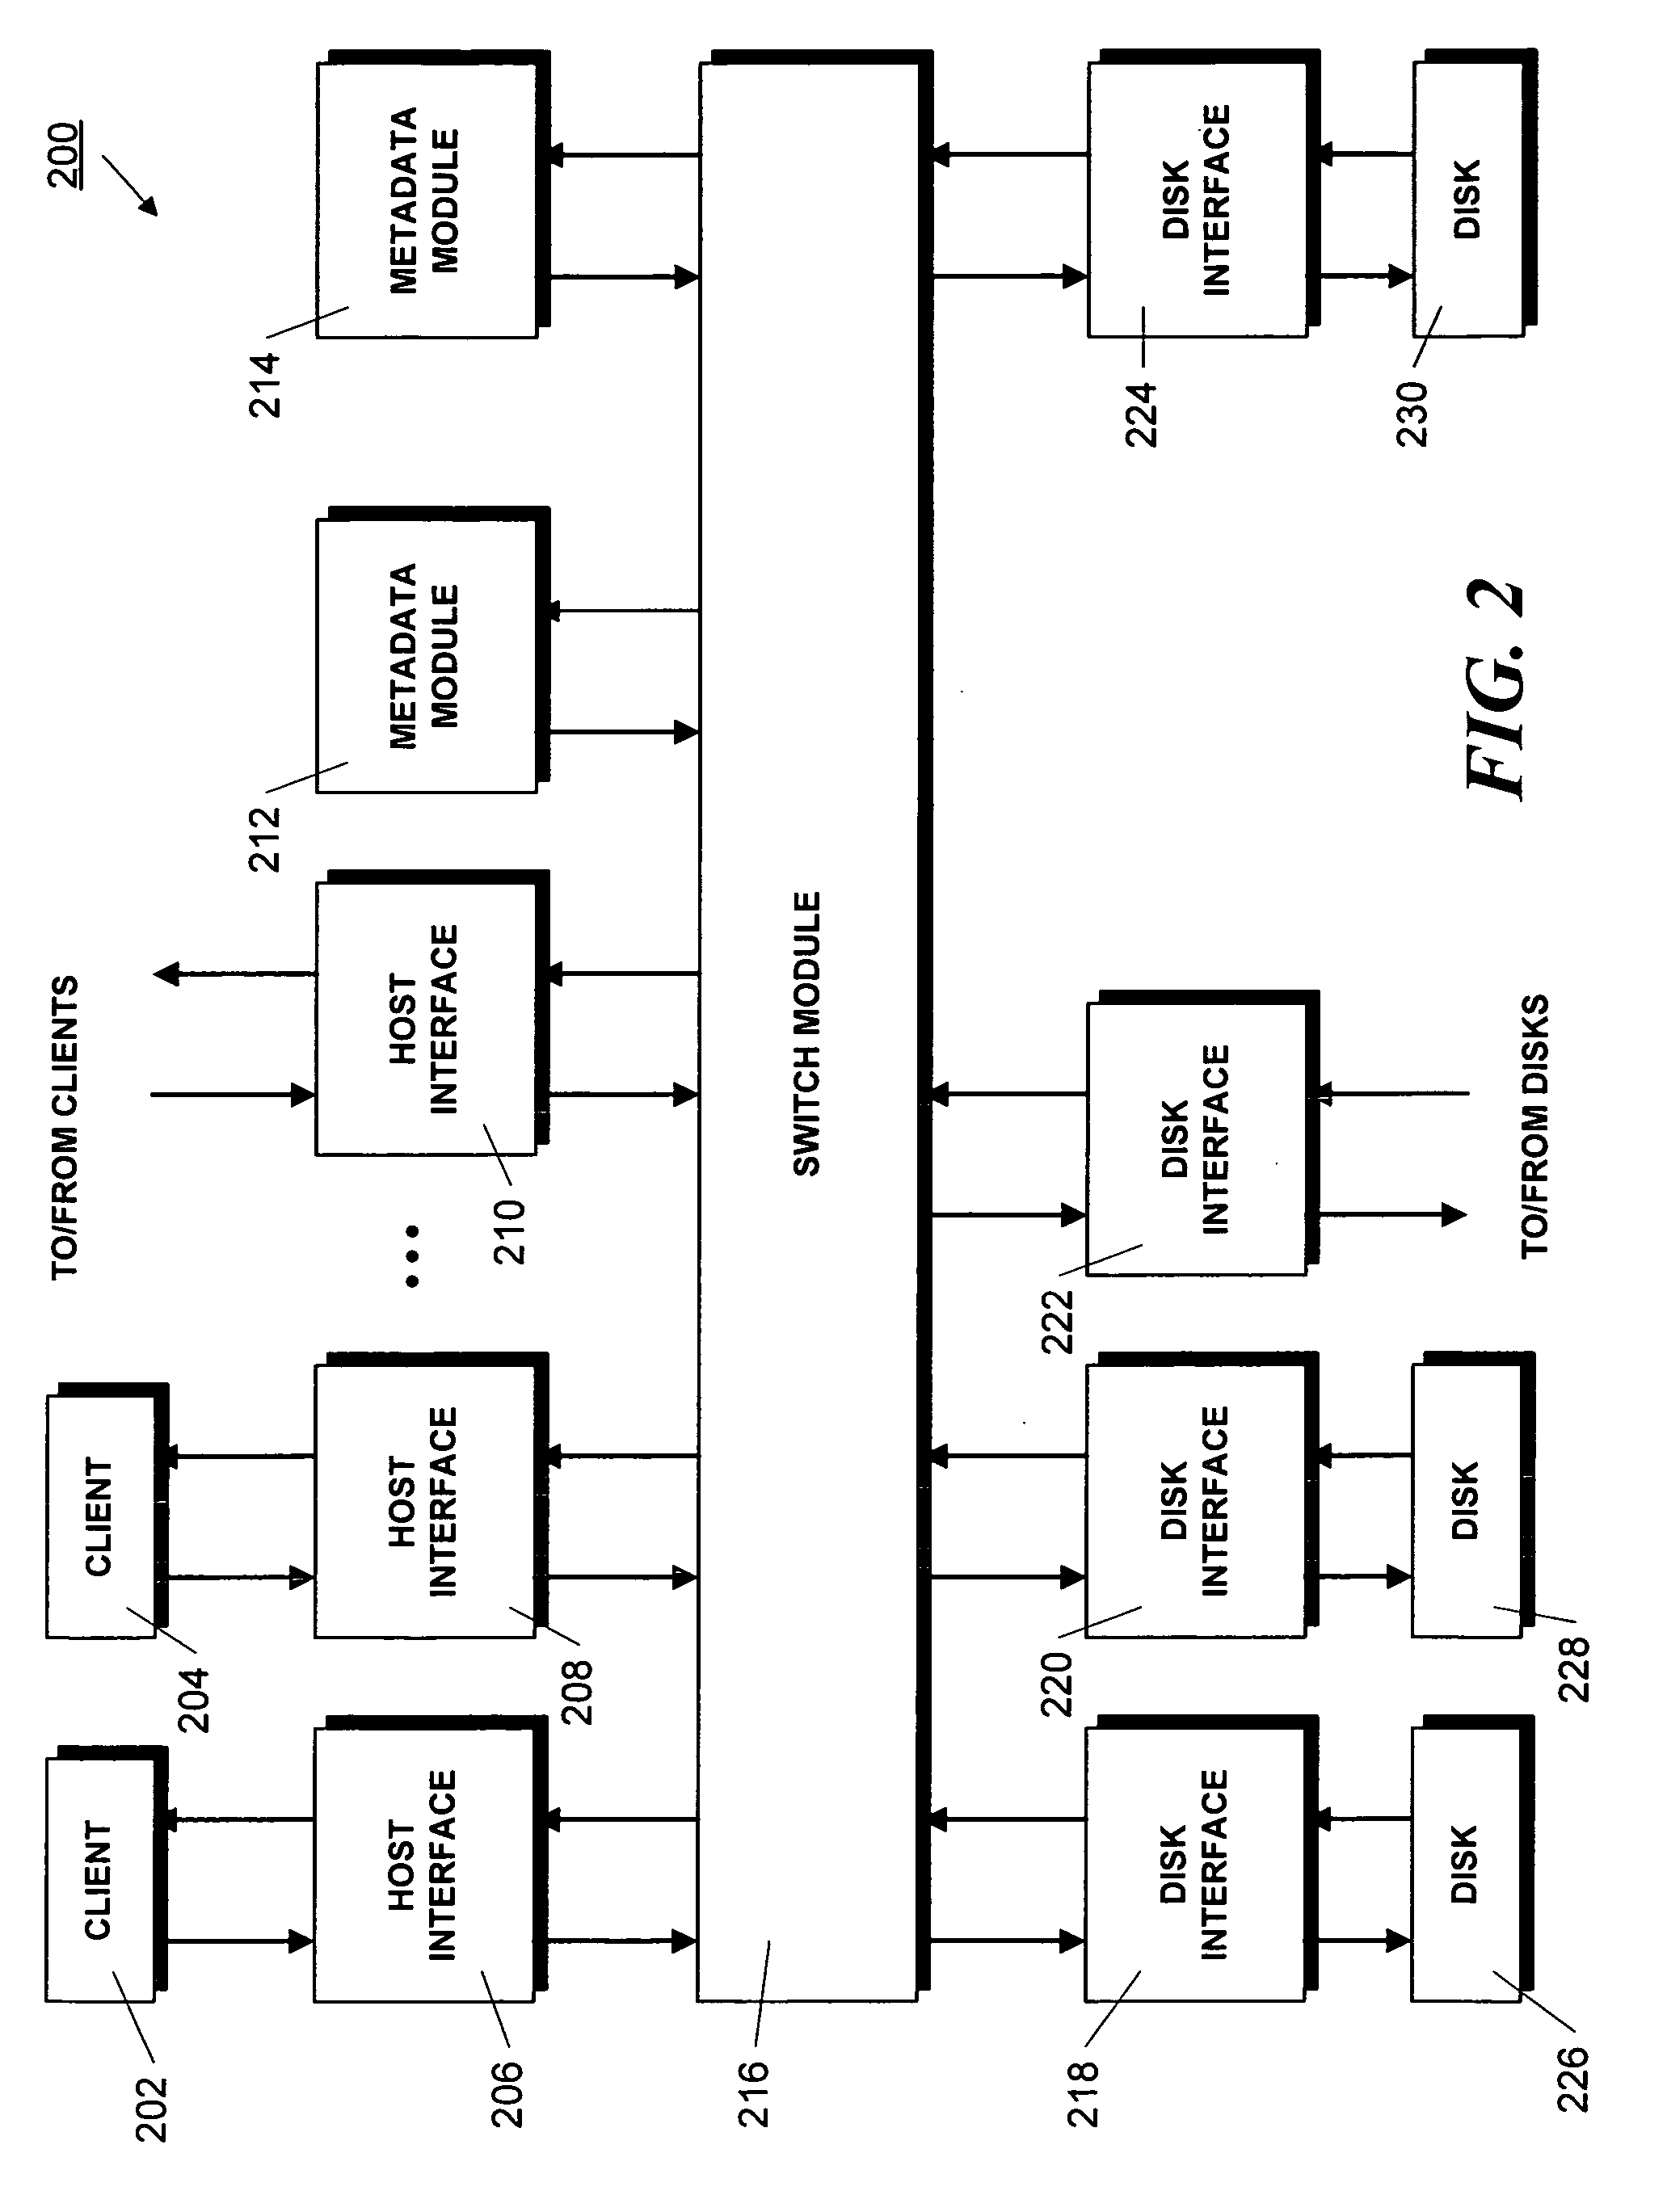 Method and apparatus for implementing high-performance, scaleable data processing and storage systems